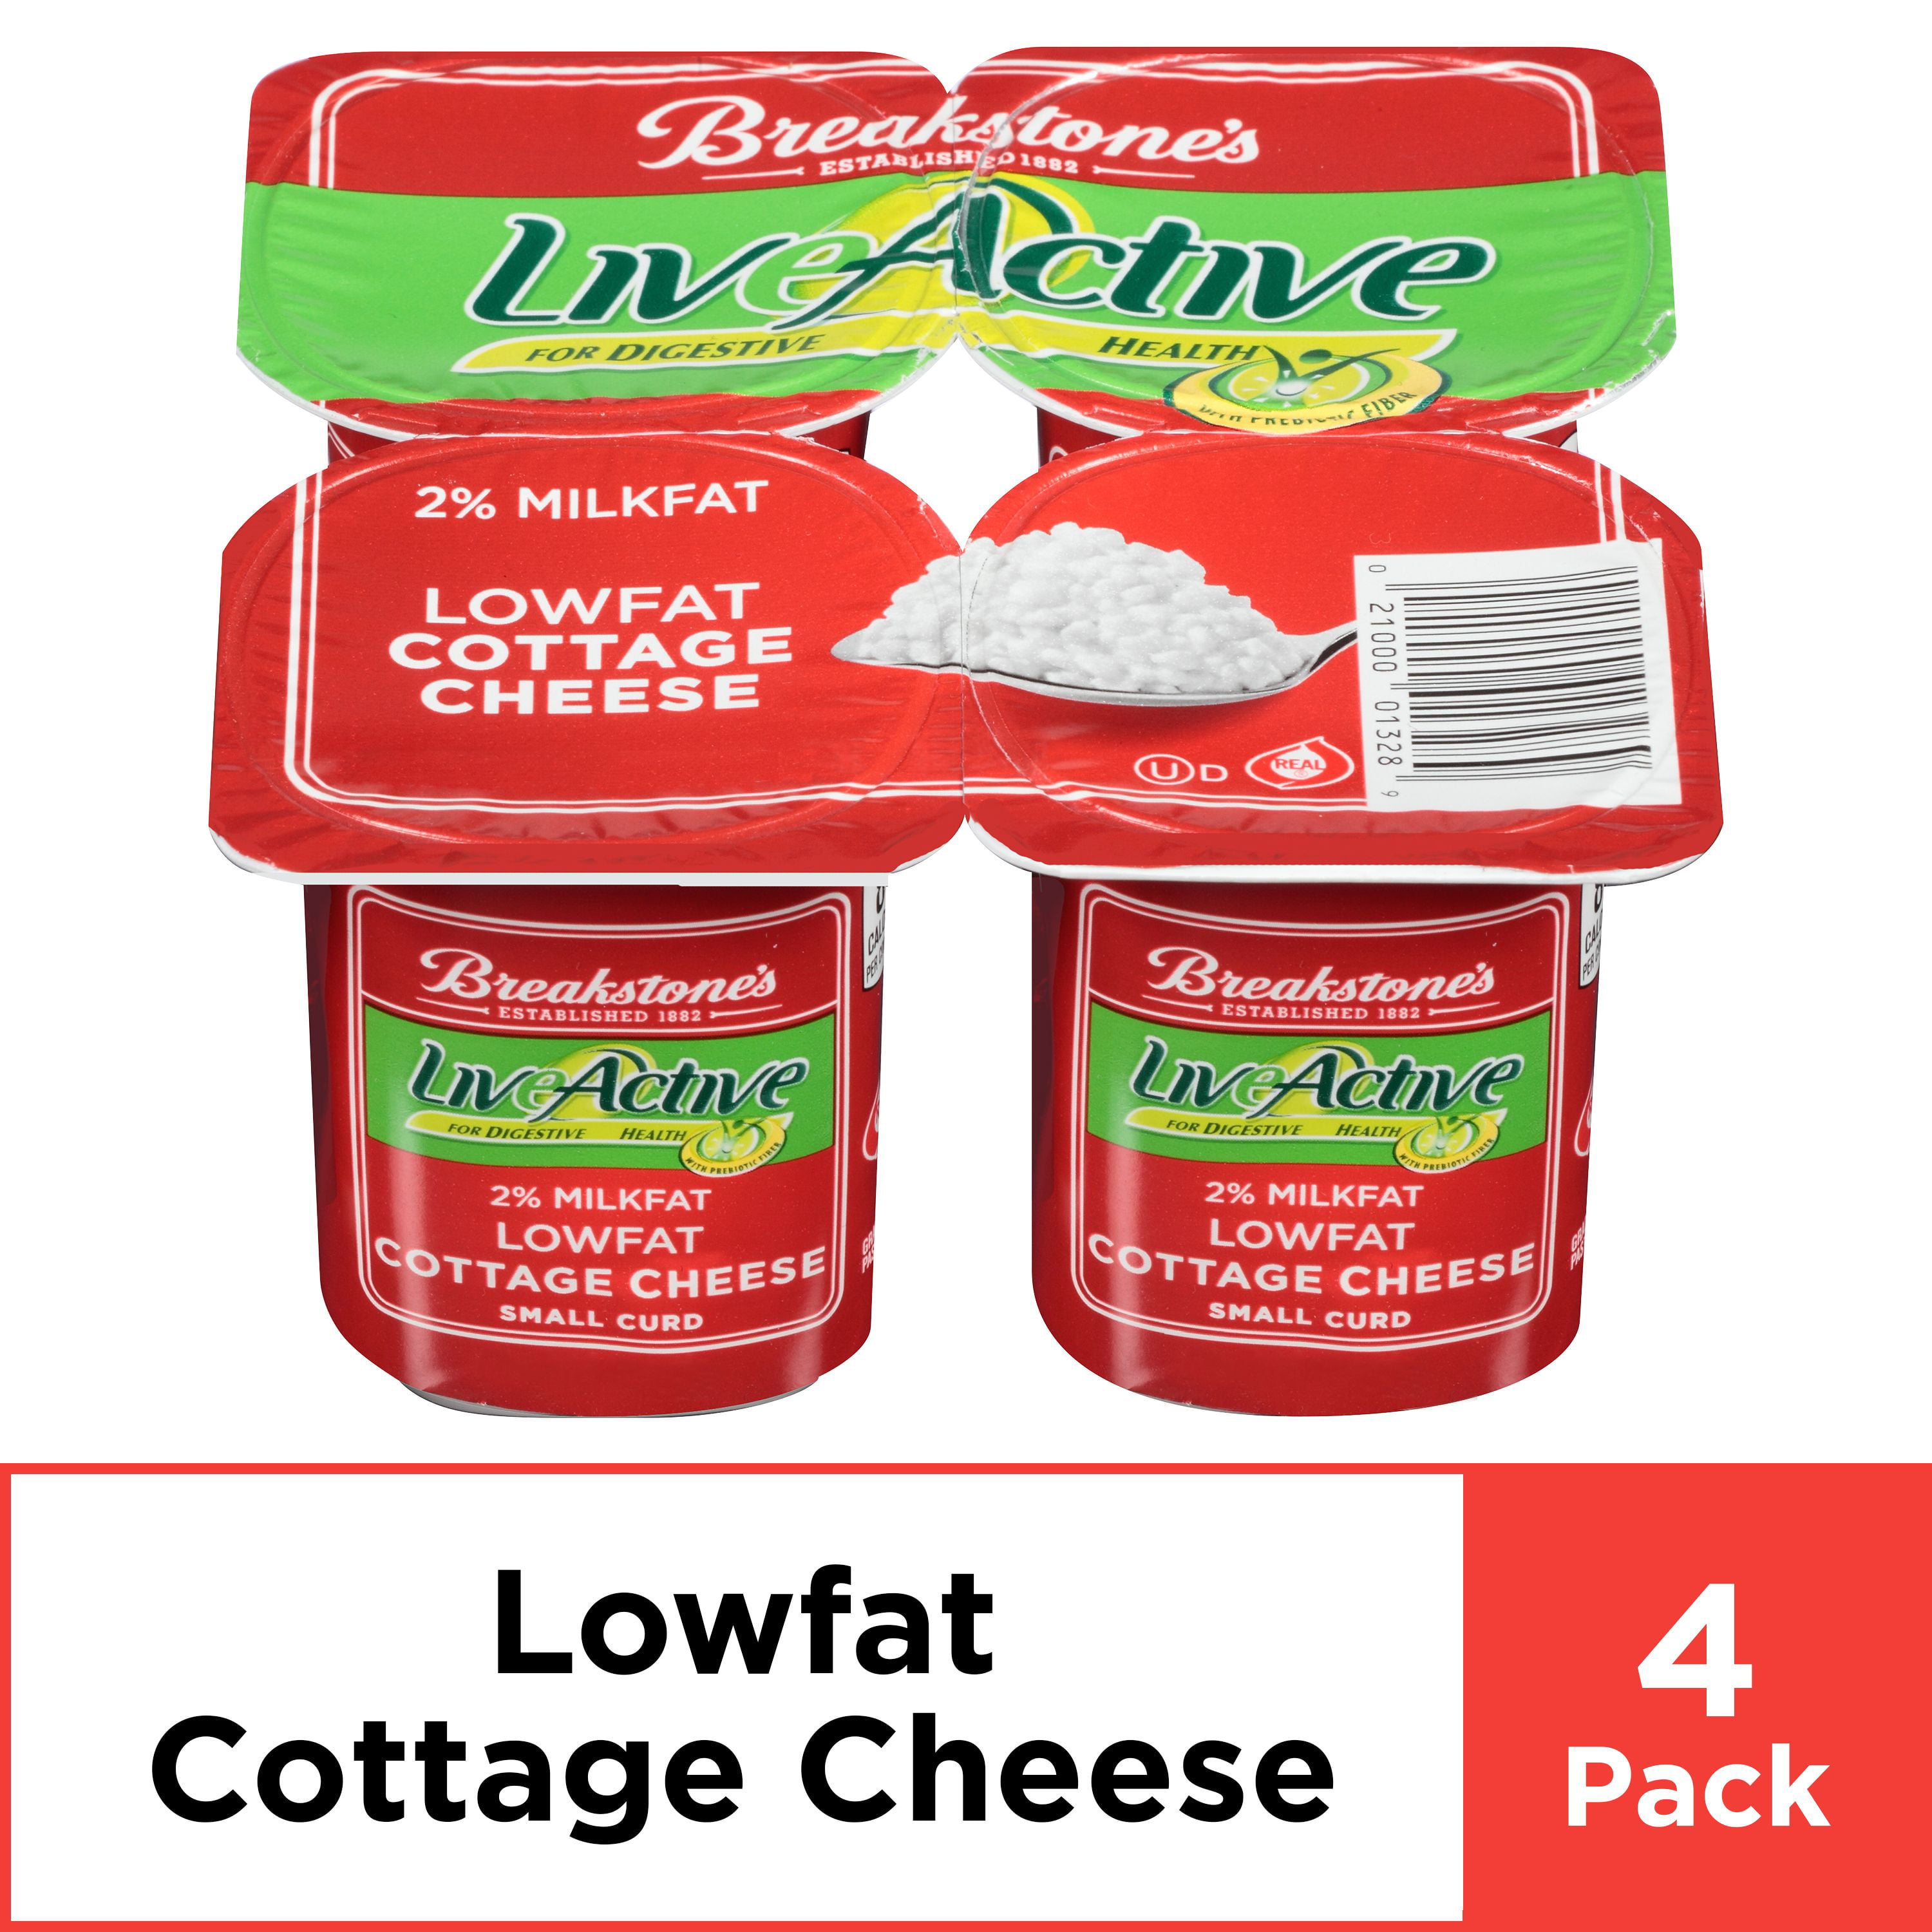 Breakstone S Live Active Low Fat Small Curd 2 Milkfat Cottage